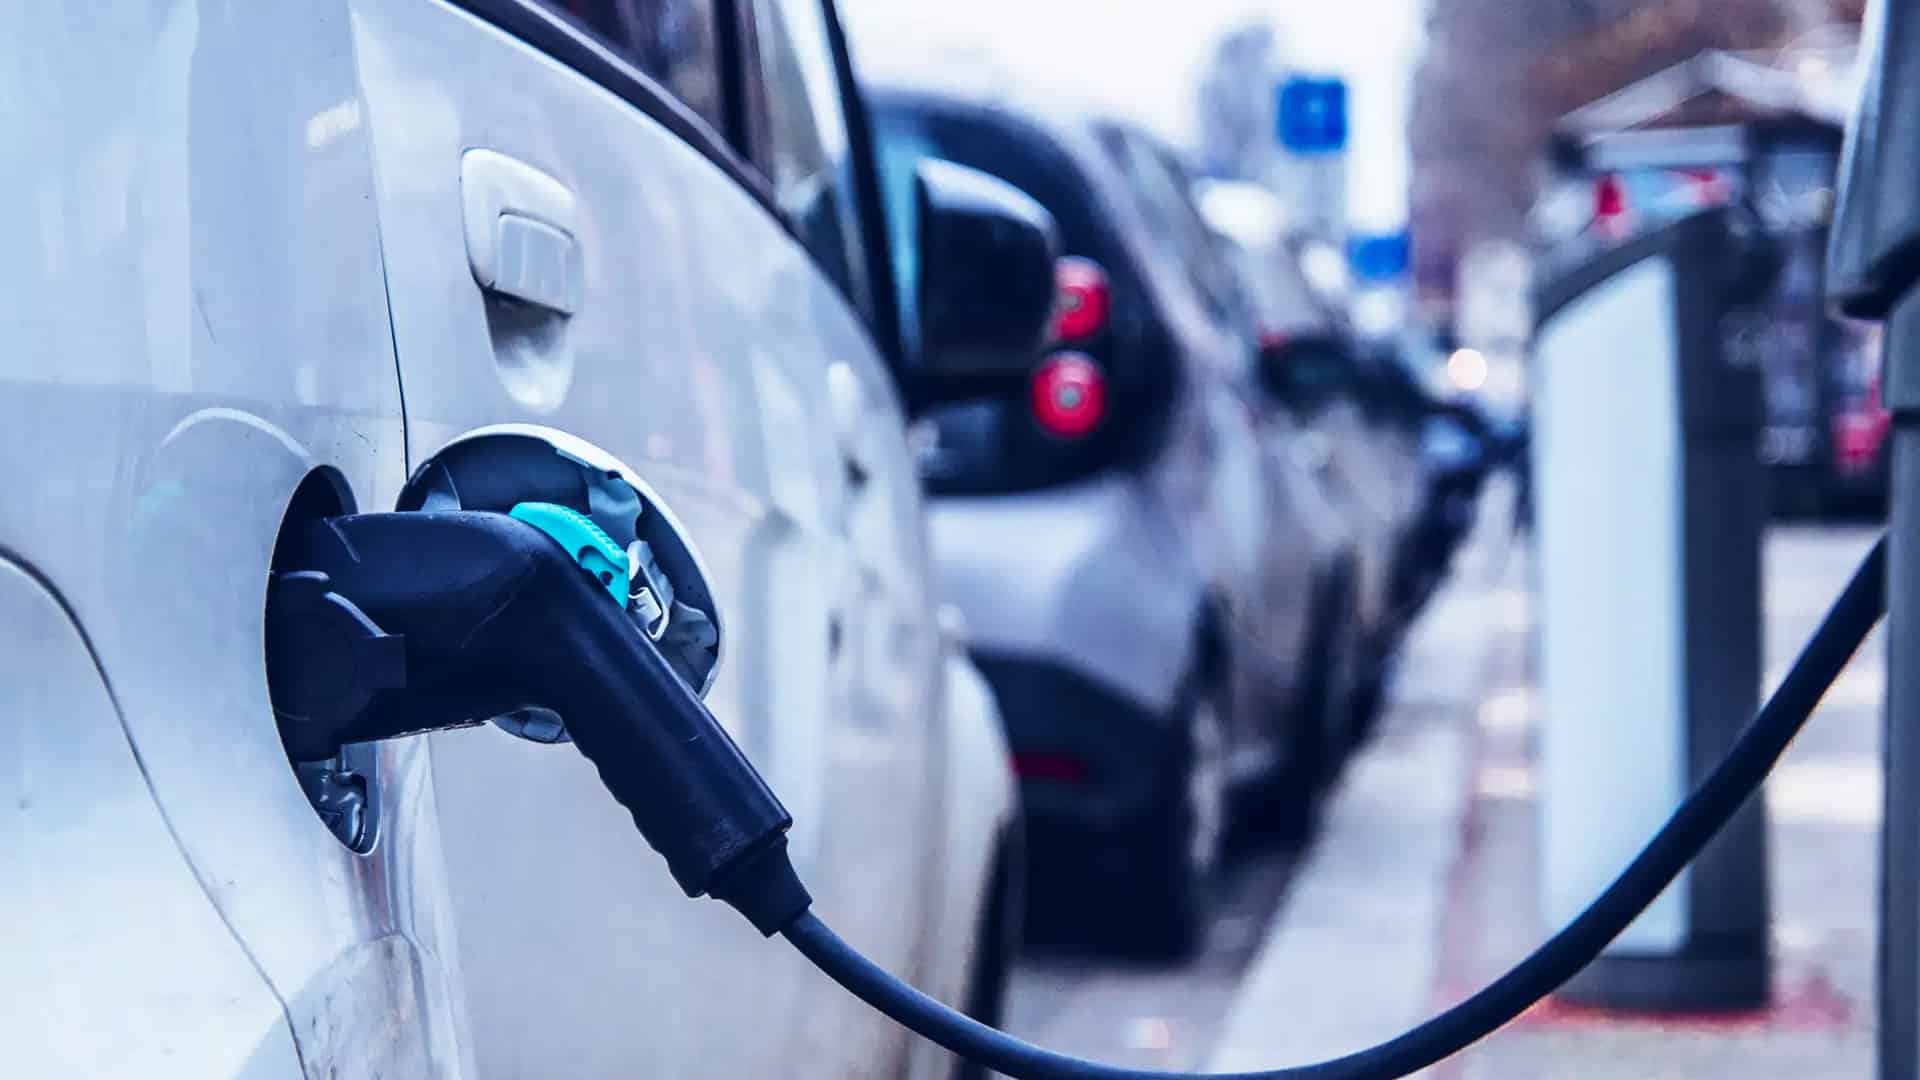 Sun-N-Sand Hotels partners with Greenie Energy to set up EV Charging stations in Mumbai & Shirdi